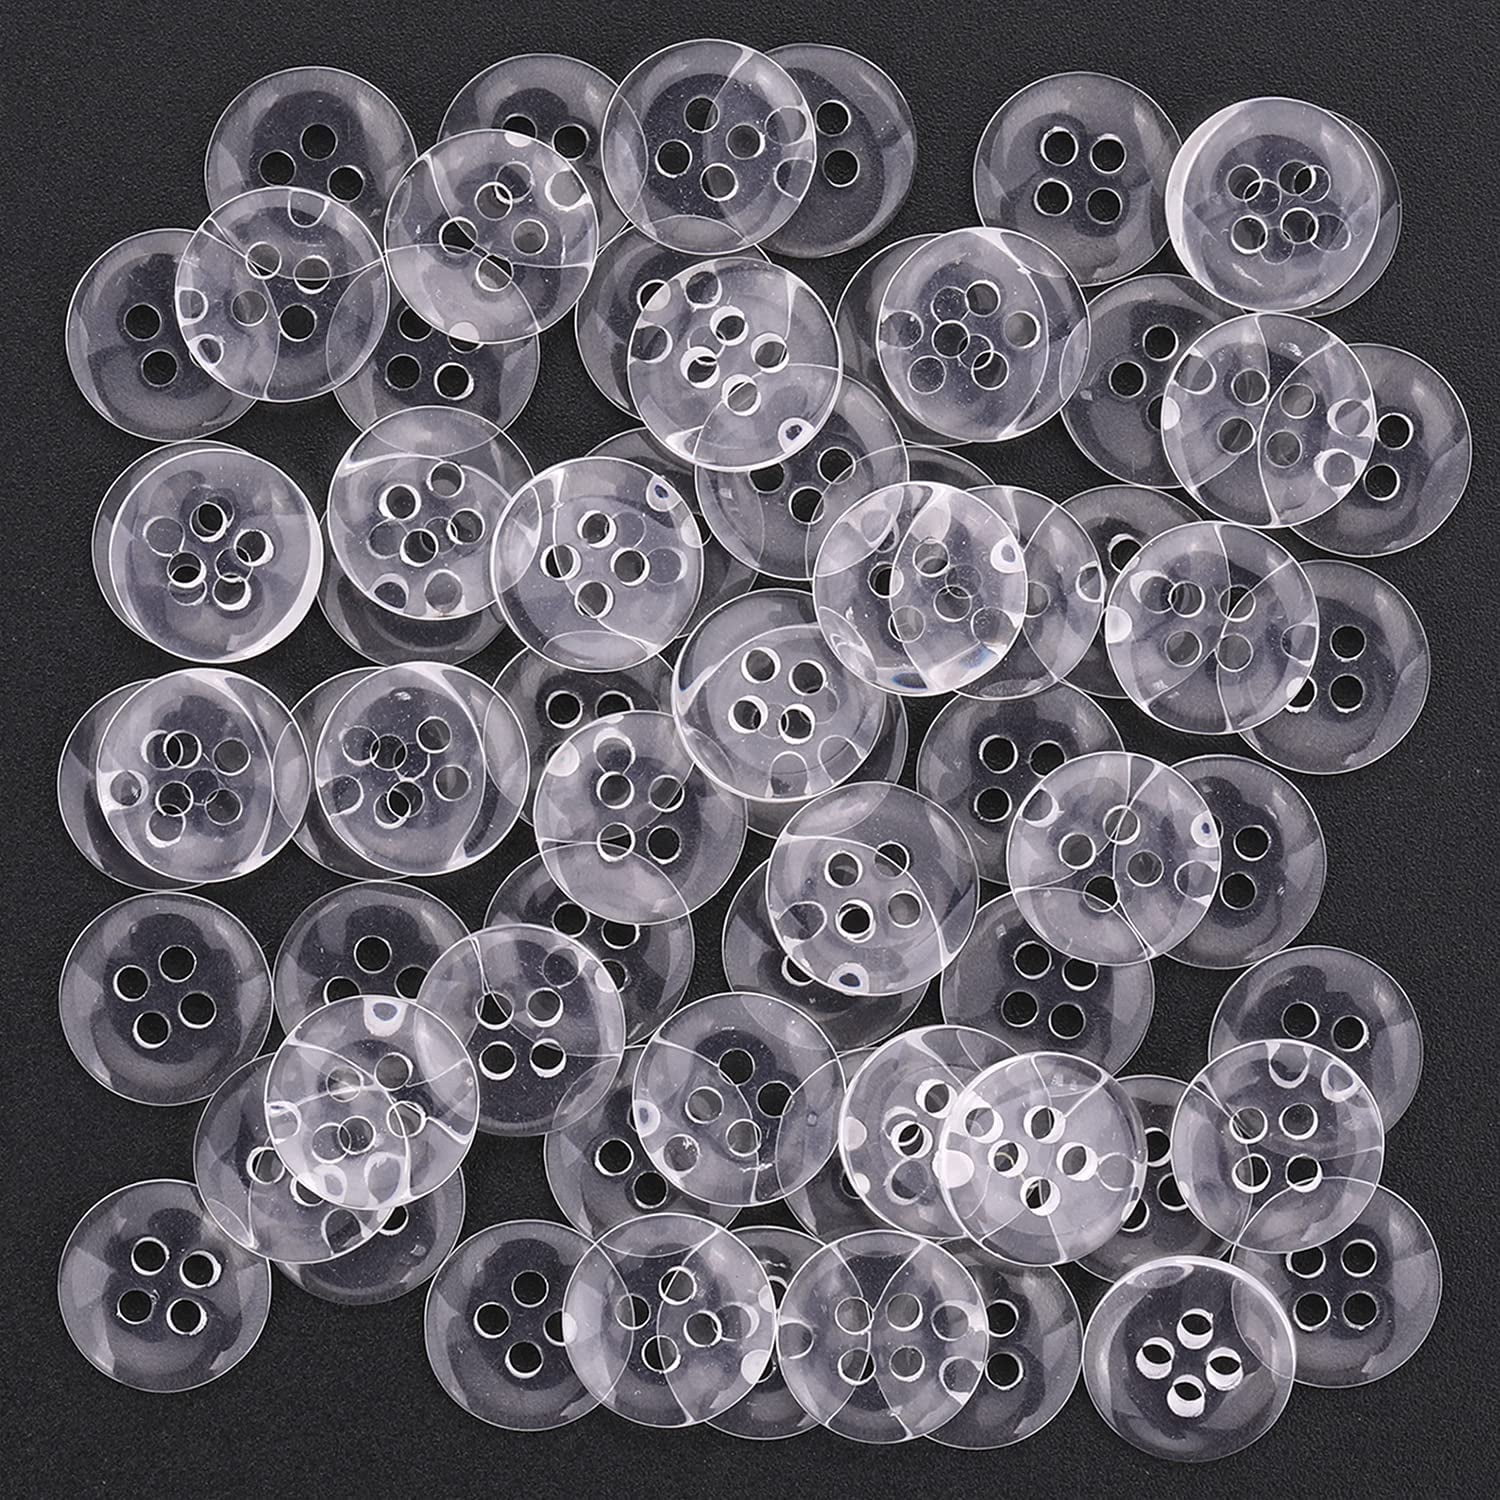 Trimming Shop 10mm Round Shape Plastic Buttons 4 Holes for DIY